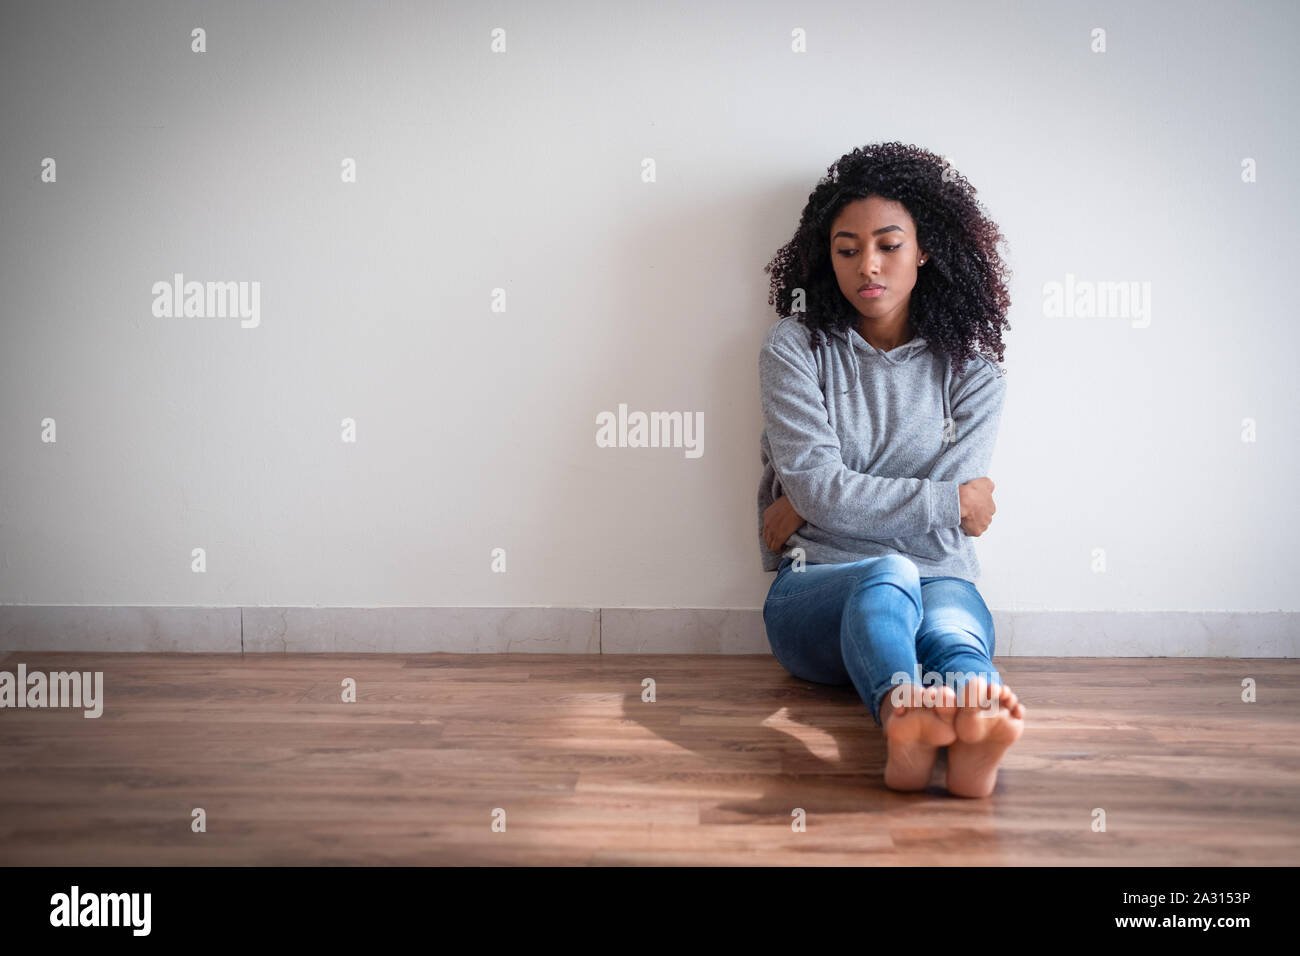 Depressed black young girl on the parquet floor Stock Photo